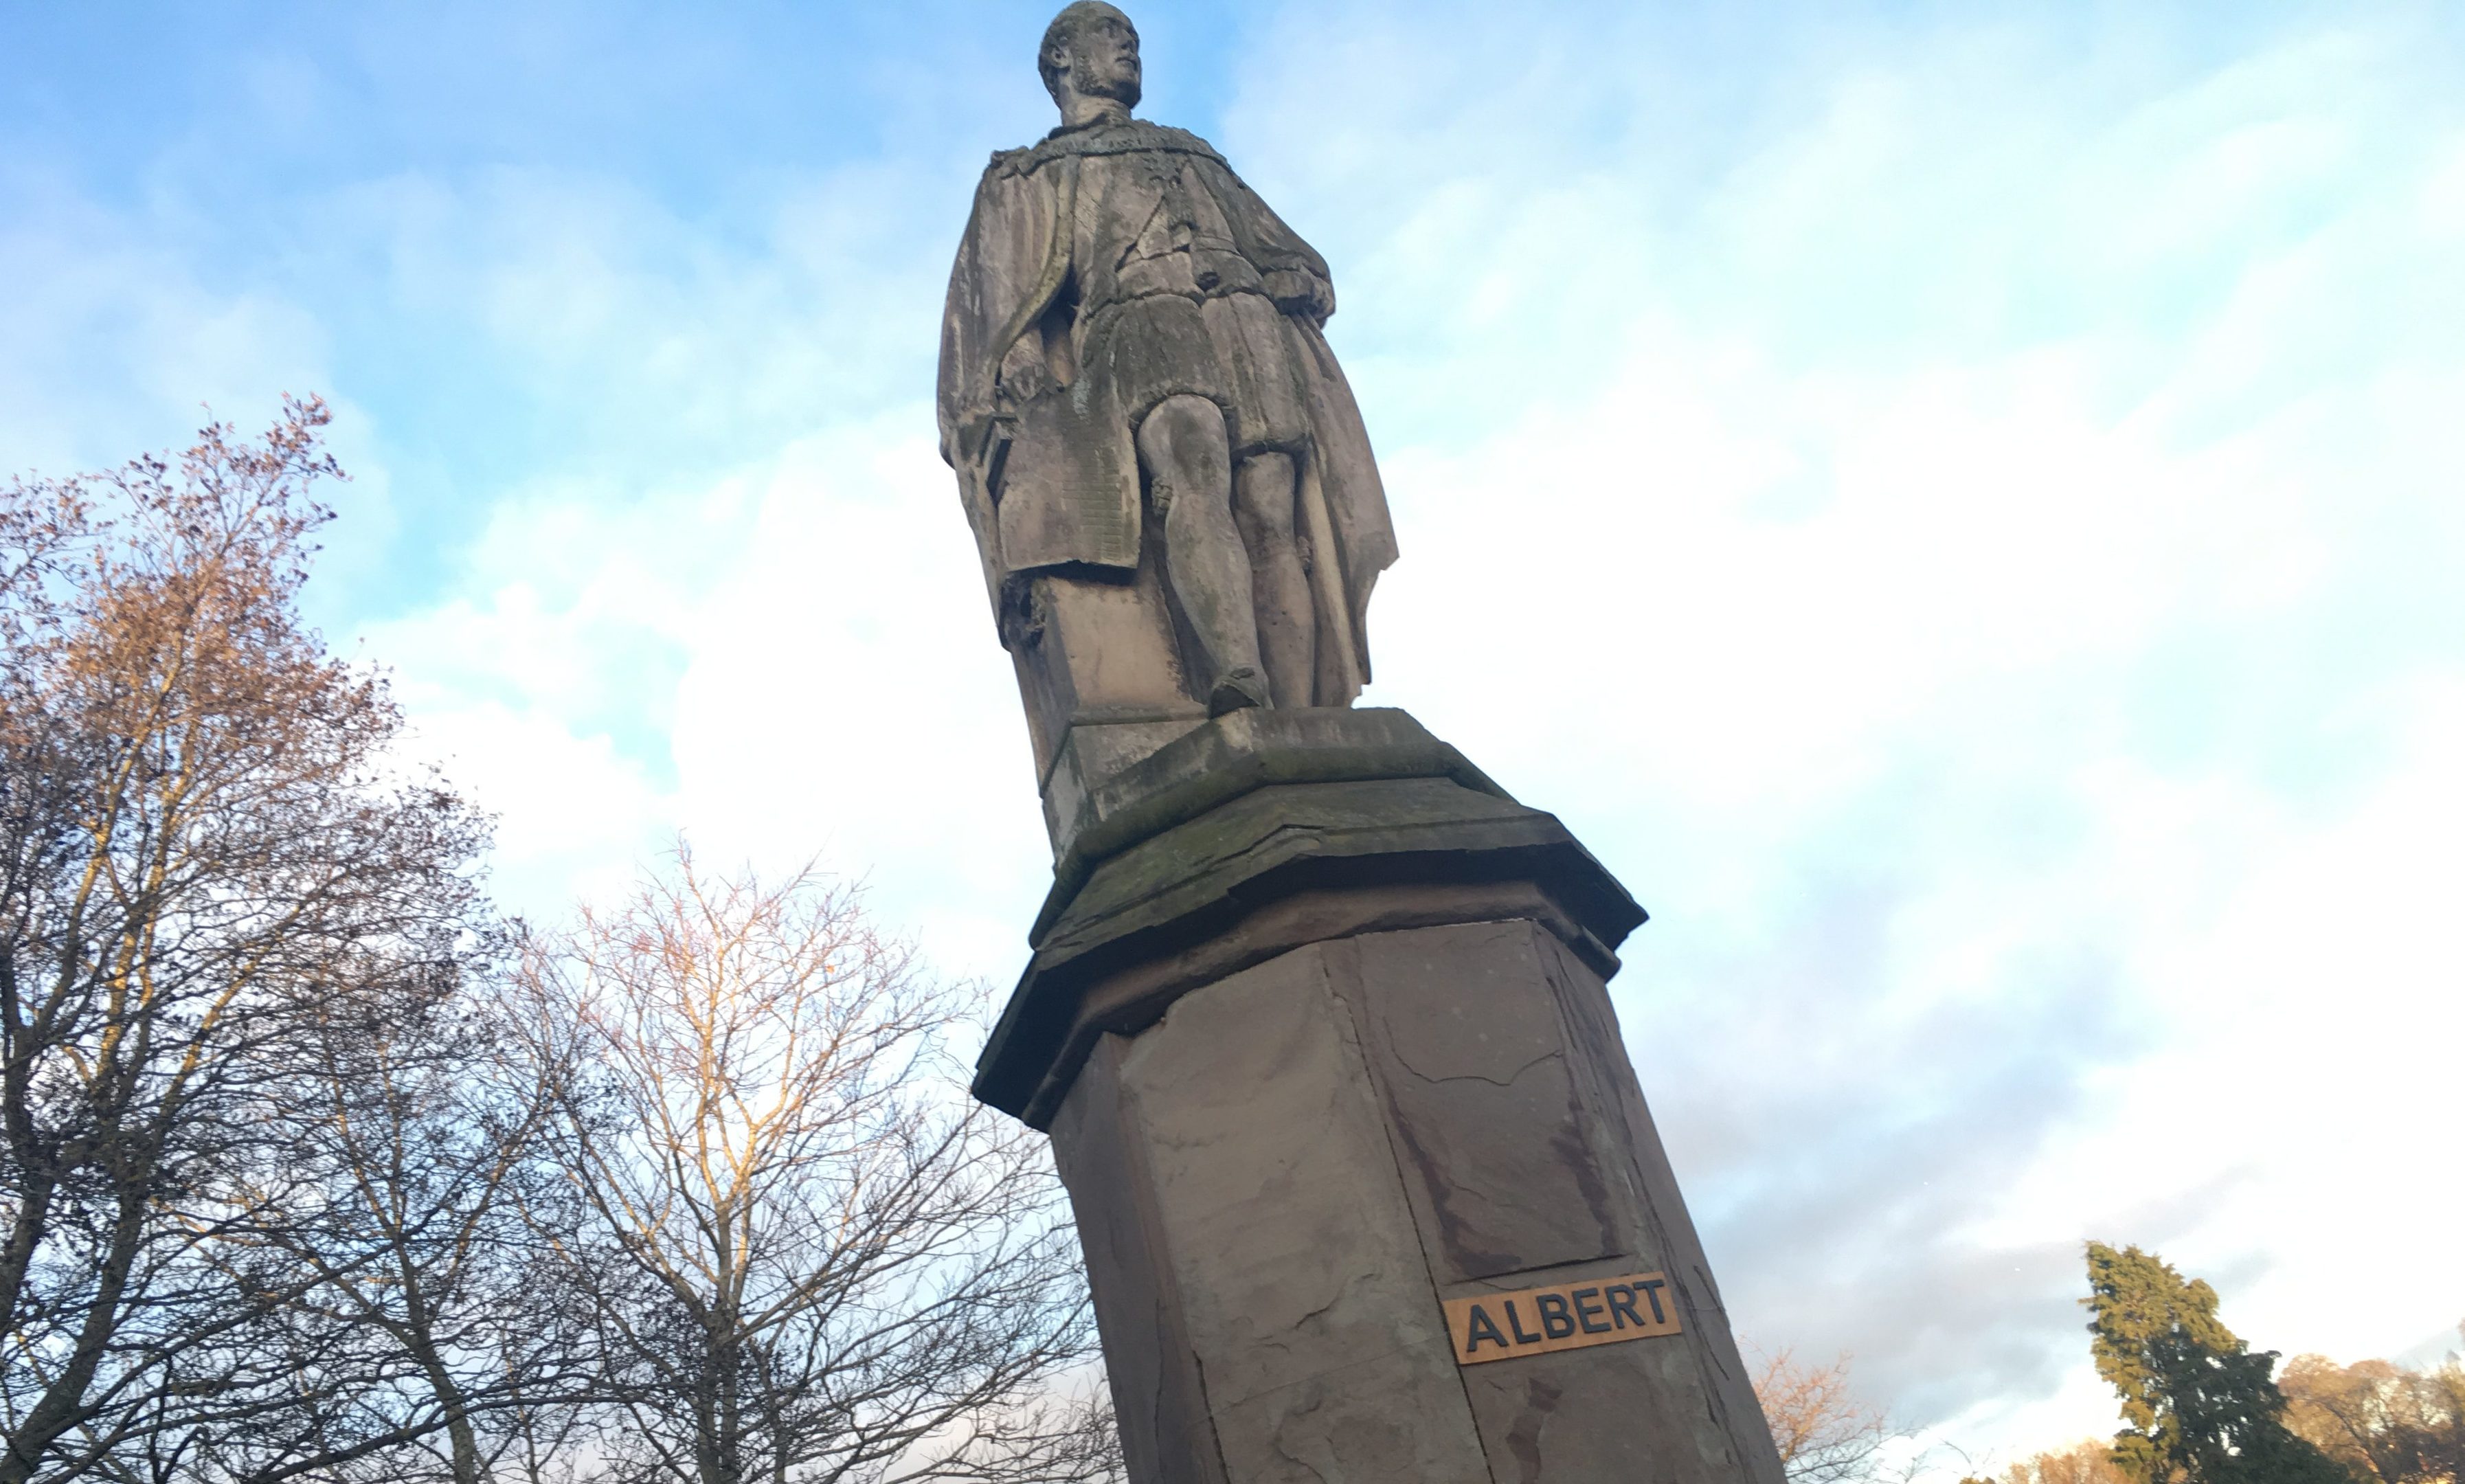 A car registration-style plate has appeared on Perth's Prince Albert statue.